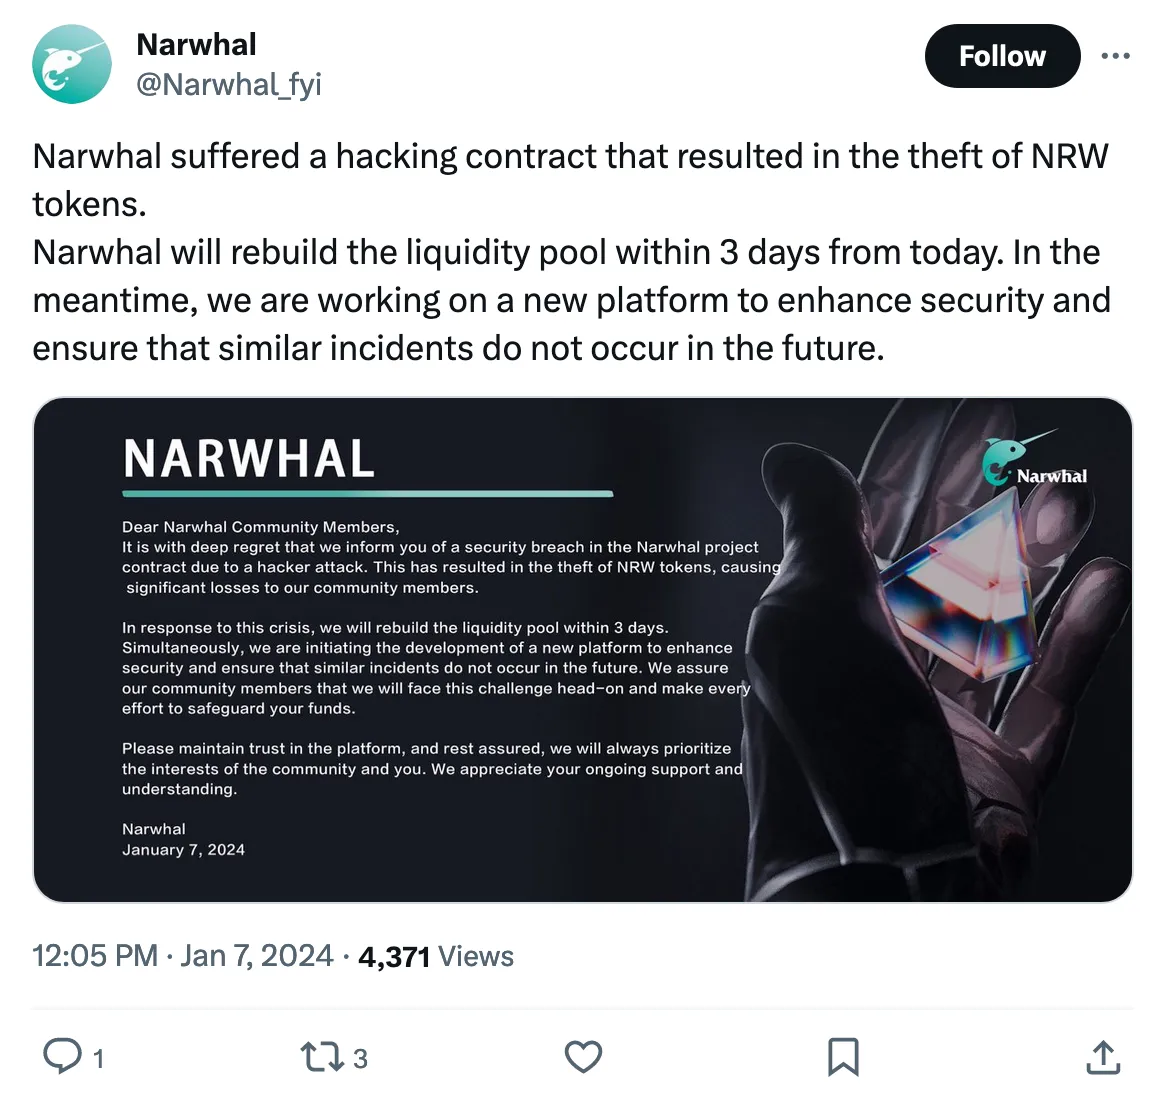 Narwhal suffered a hacking contract that resulted in the theft of NRW tokens.
Narwhal will rebuild the liquidity pool within 3 days from today. In the meantime, we are working on a new platform to enhance security and ensure that similar incidents do not occur in the future. 
Tweeted at 12:05 PM · Jan 7, 2024